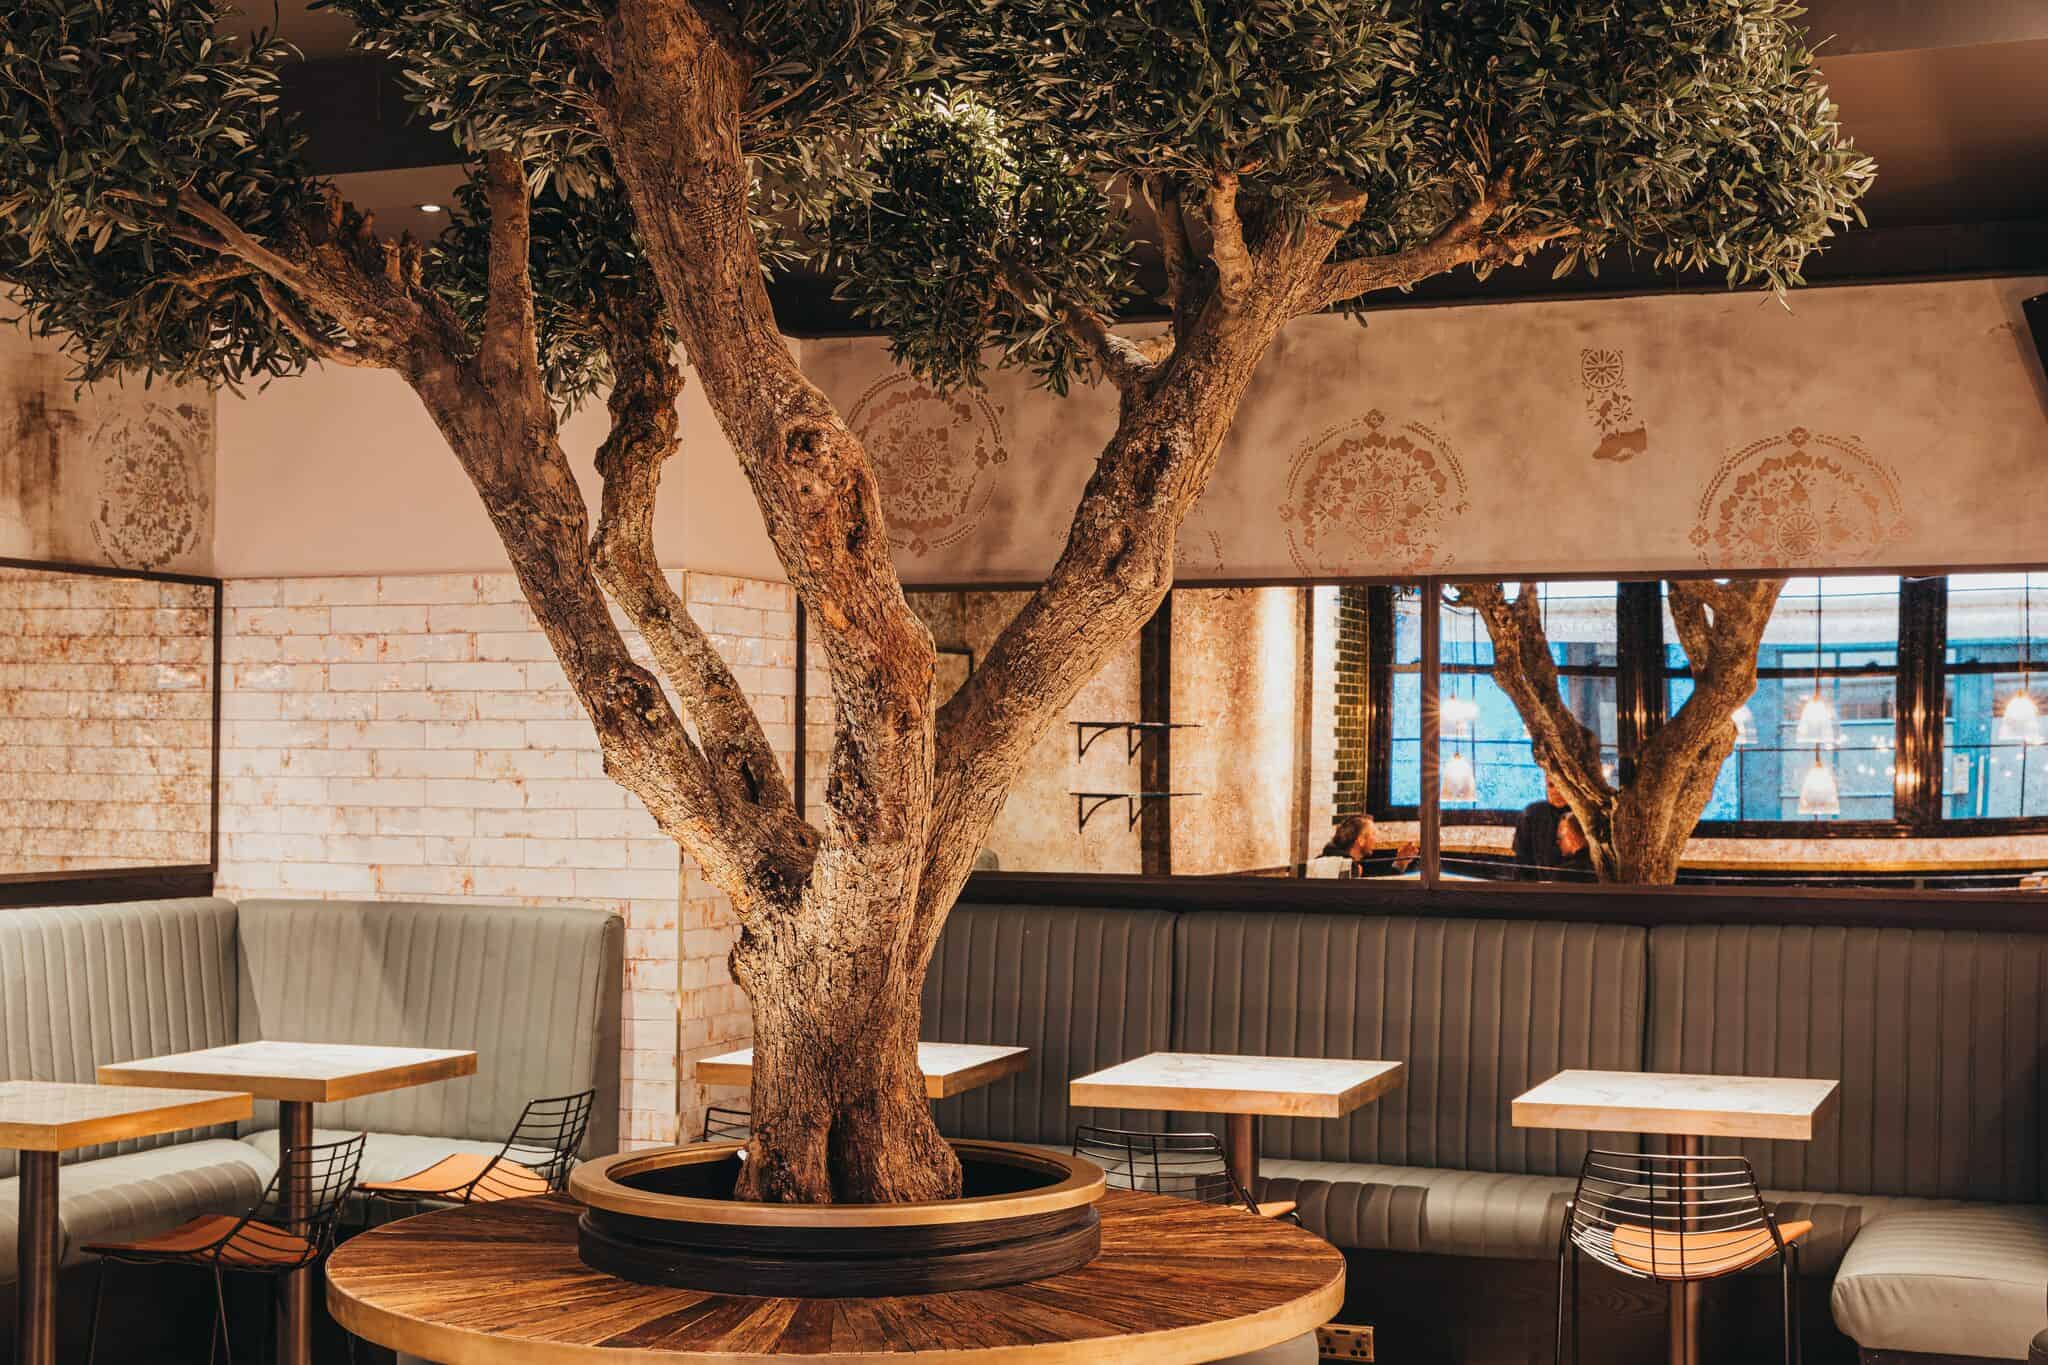 Bancone Golden Square Interior with olive tree 3